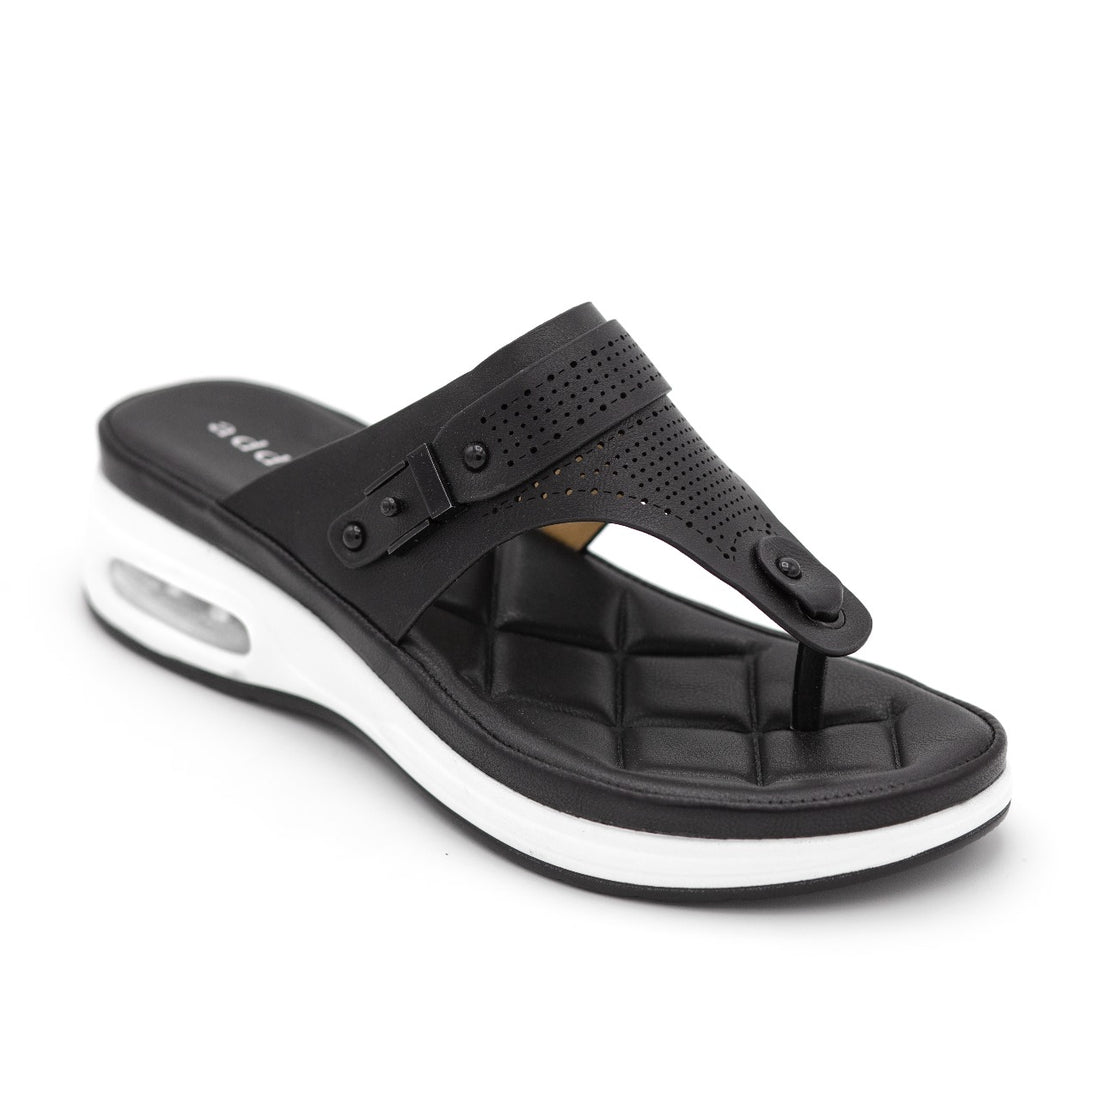 ADX37 medicated flipflop